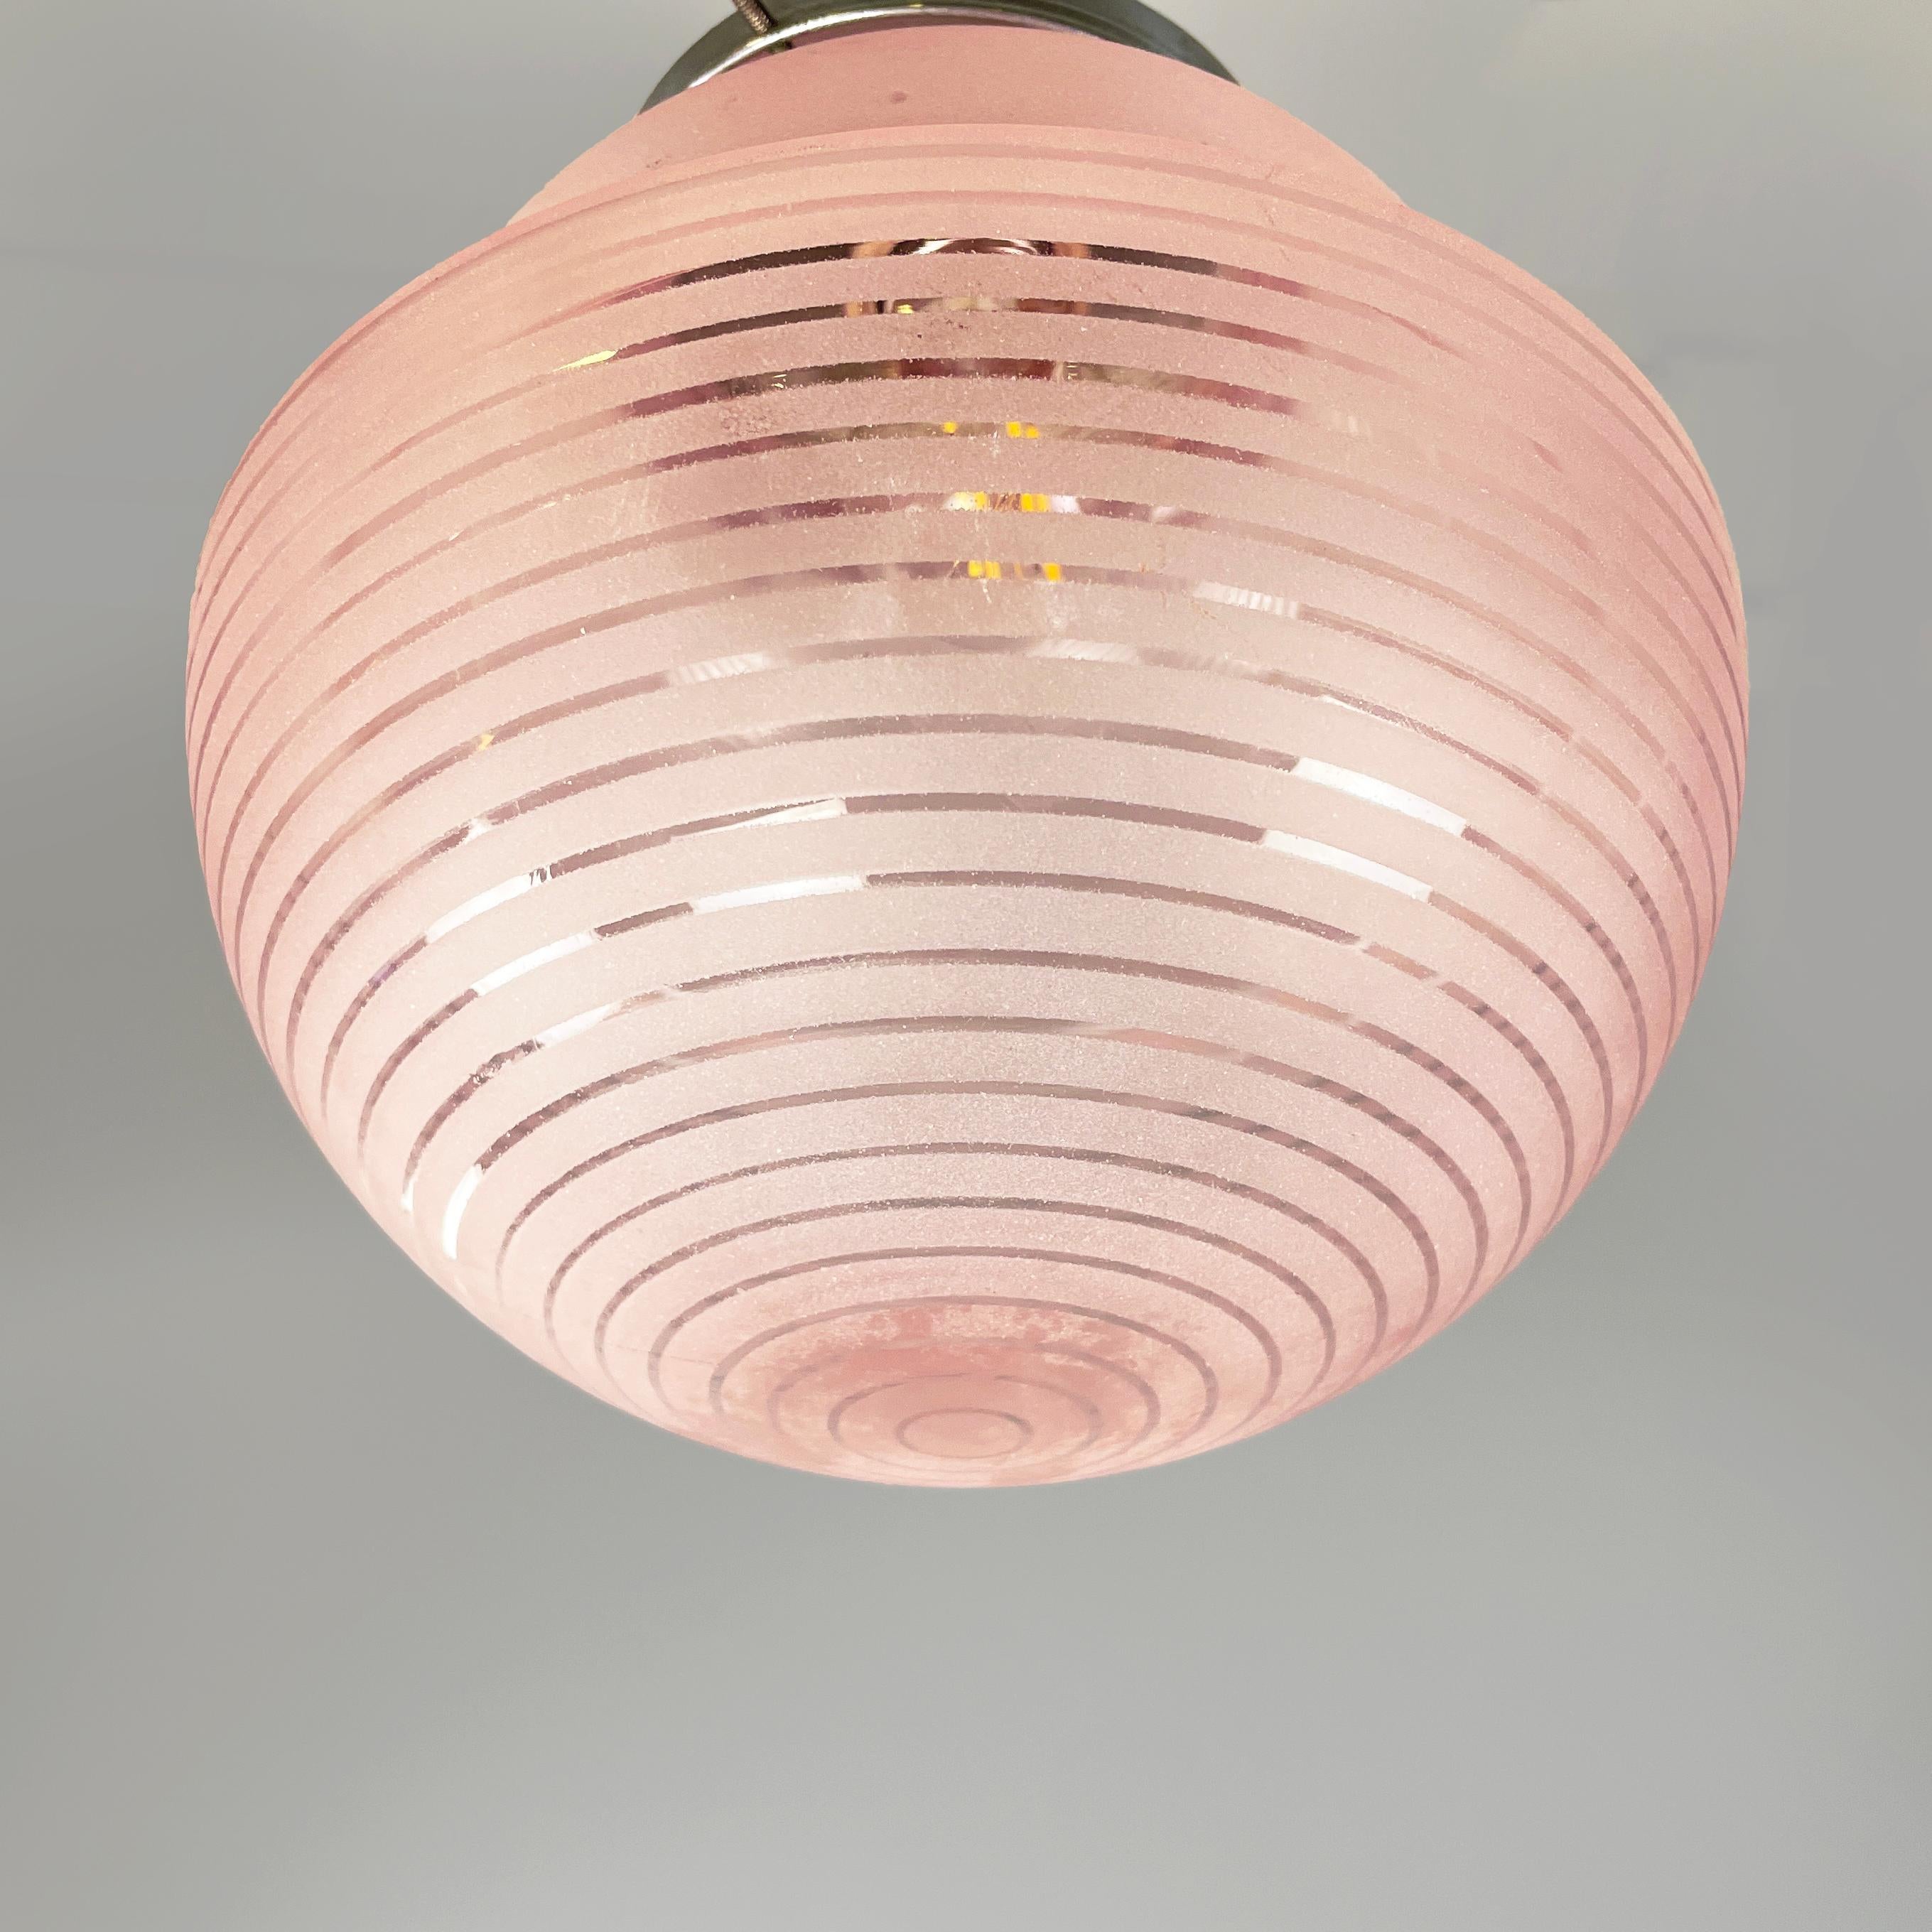 Mid-20th Century Italian mid-century modern Ceiling lamp in pink glass and metal, 1940s